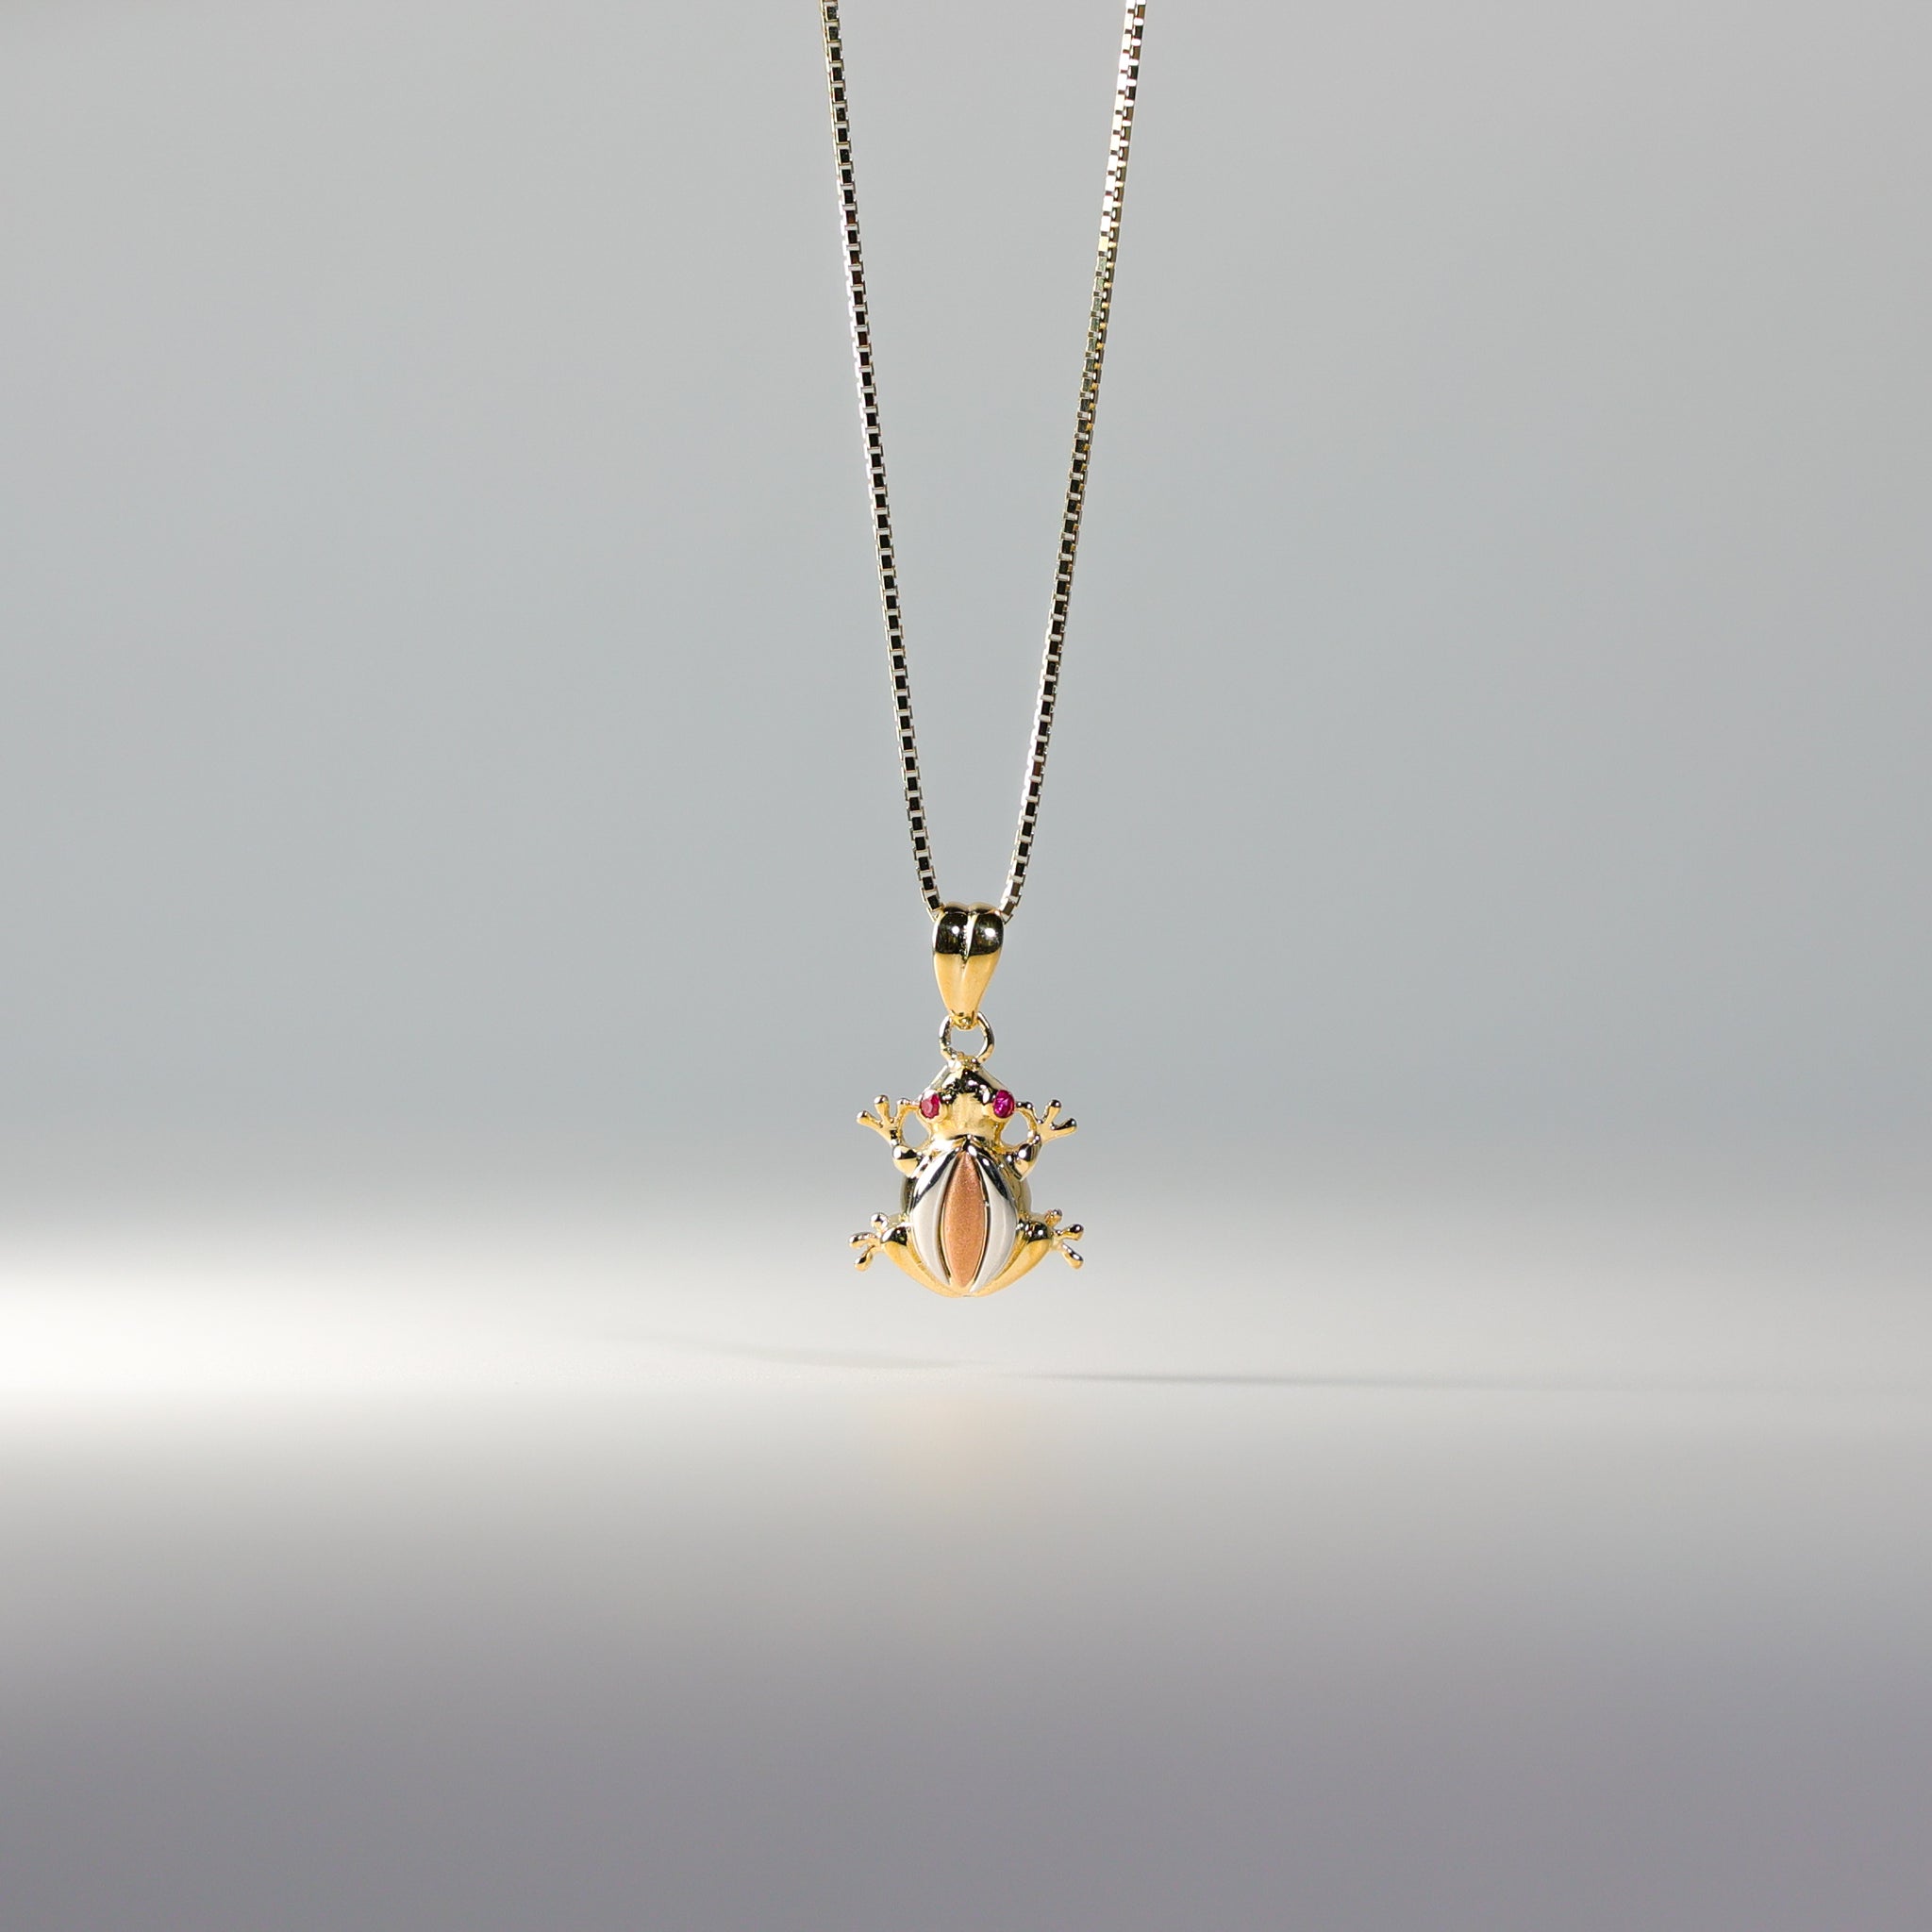 20mm 14k Gold Sitting Frog Pendant Necklace Textured Jewelry Gifts for  Women - Walmart.com